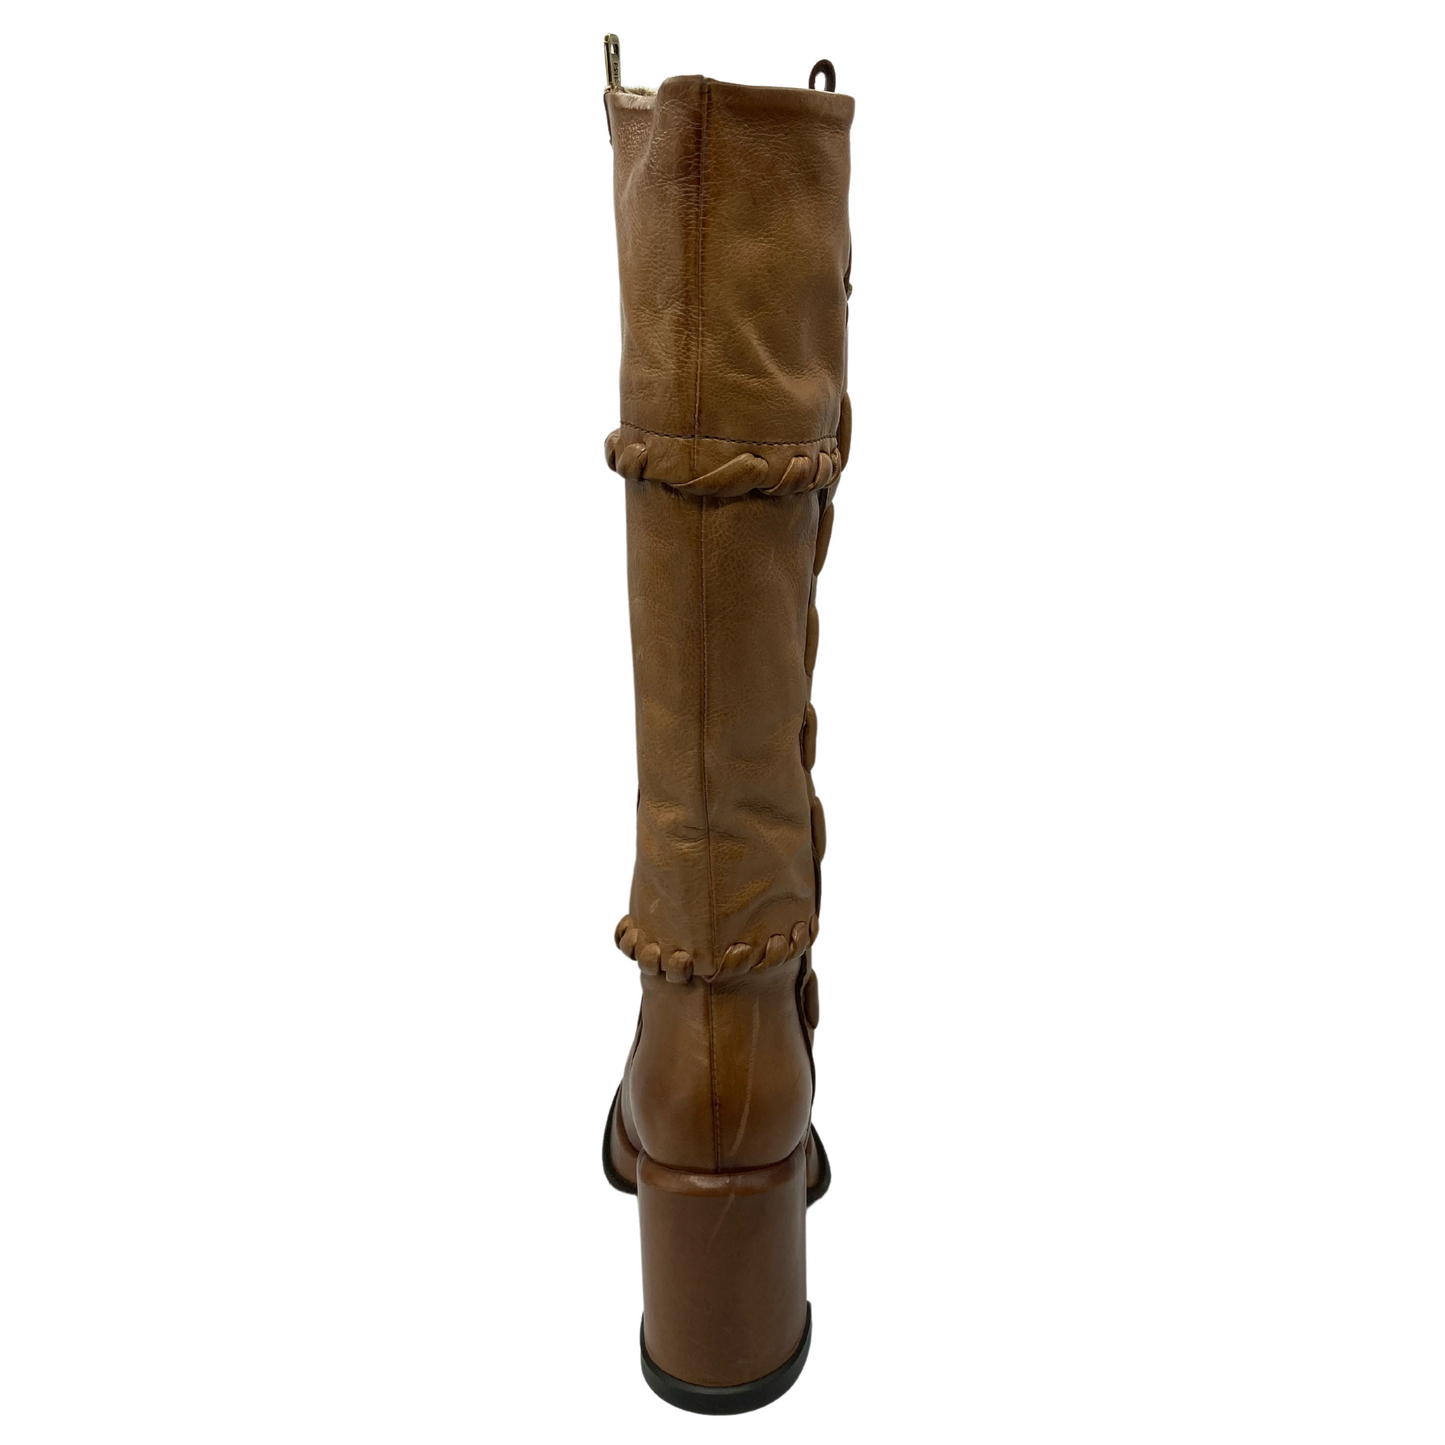 Back view of brown leather boot with block heel and side zipper closure